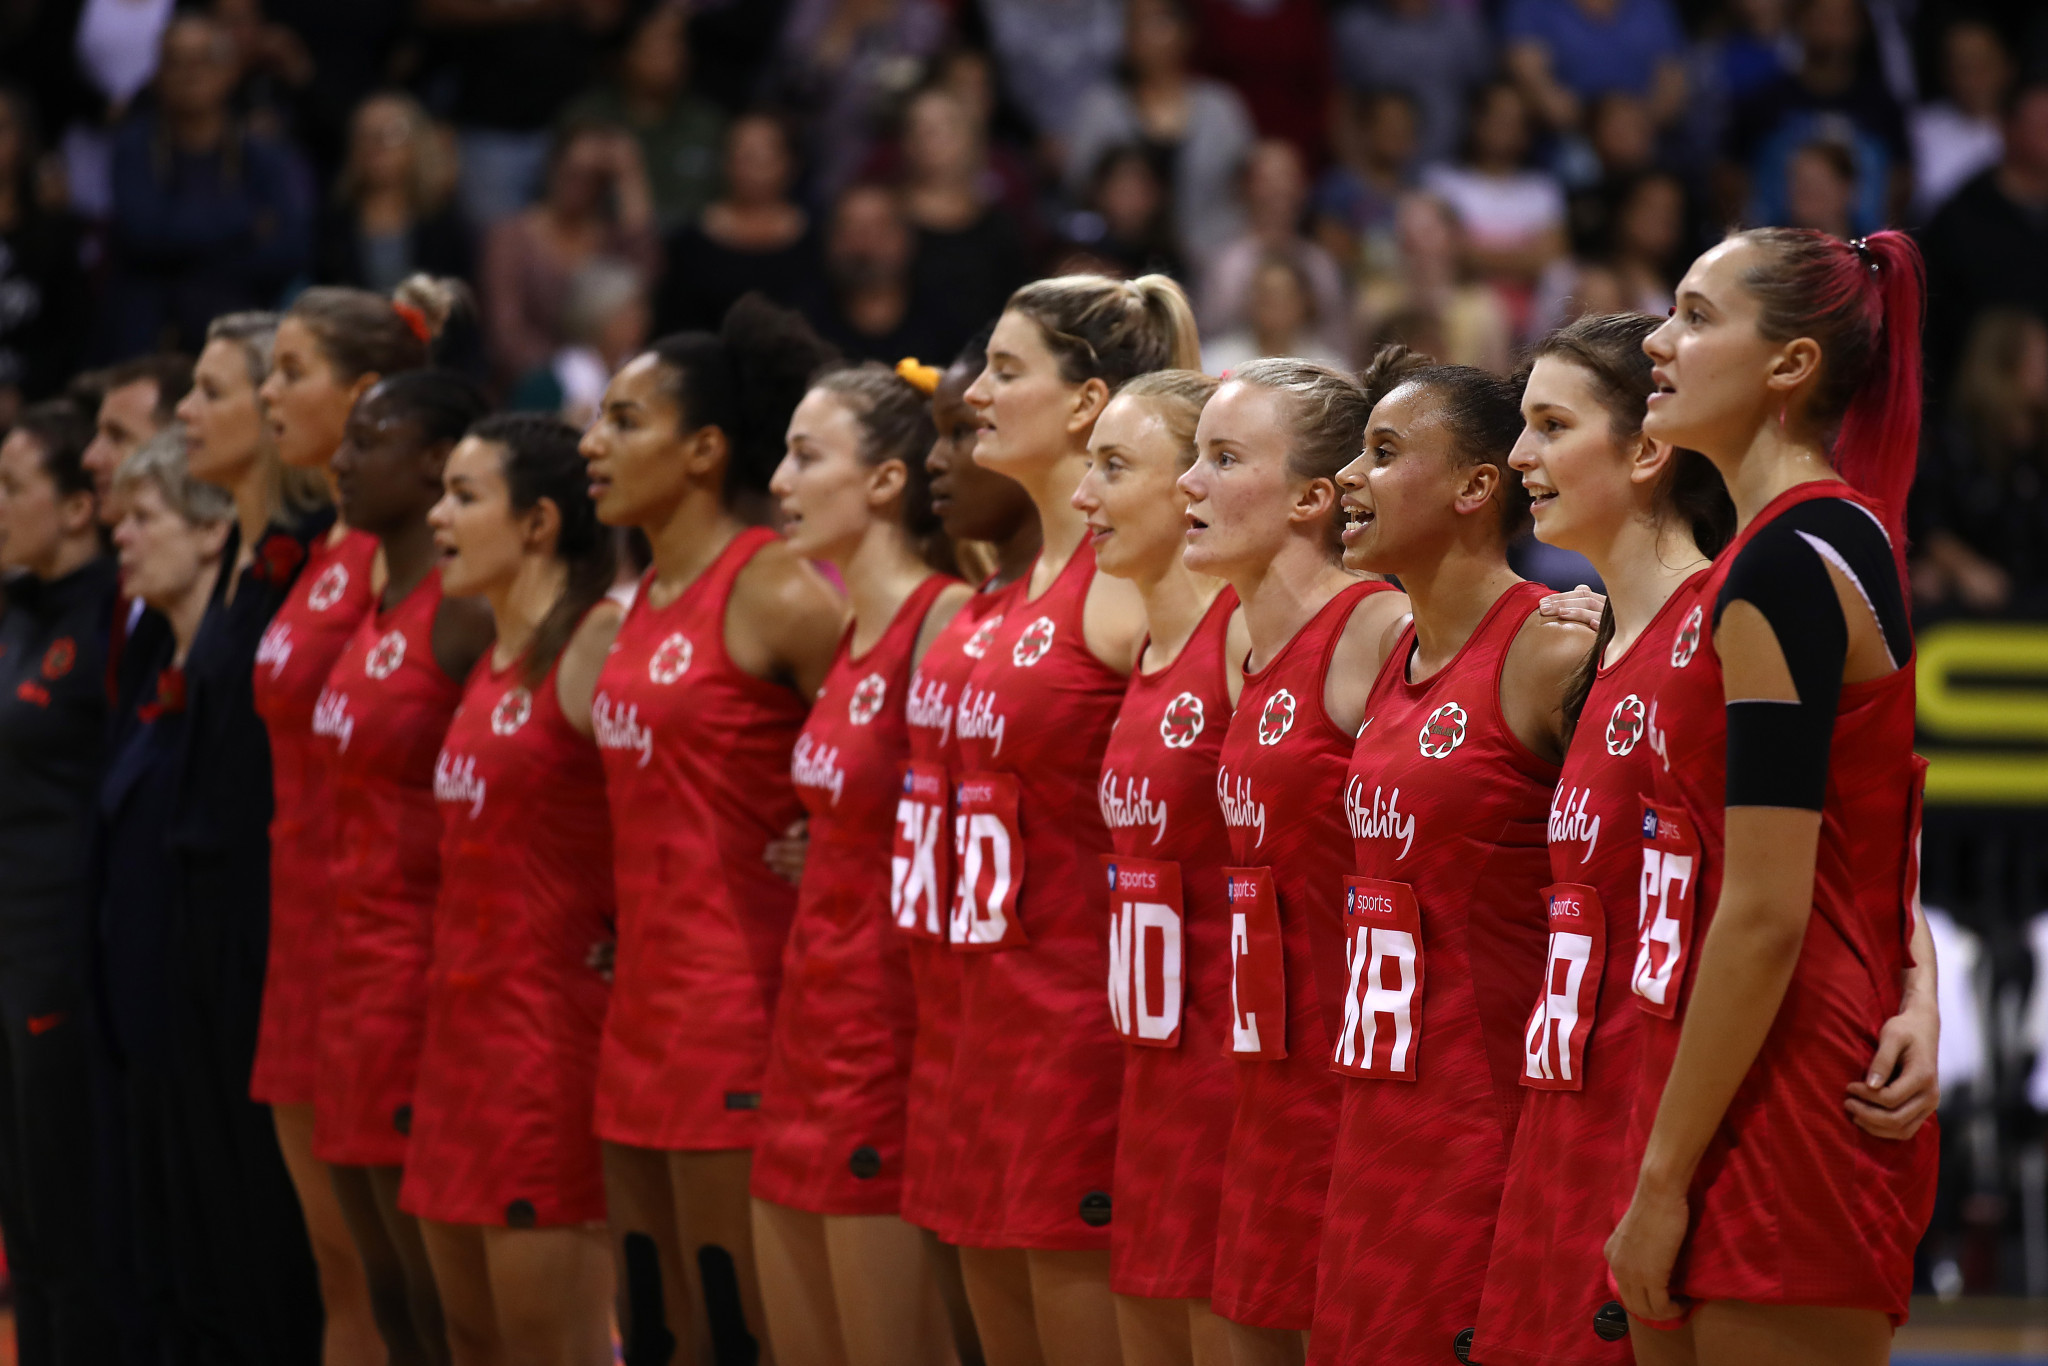 England is hosting the Netball Quad Series over the next five days ©Getty Images